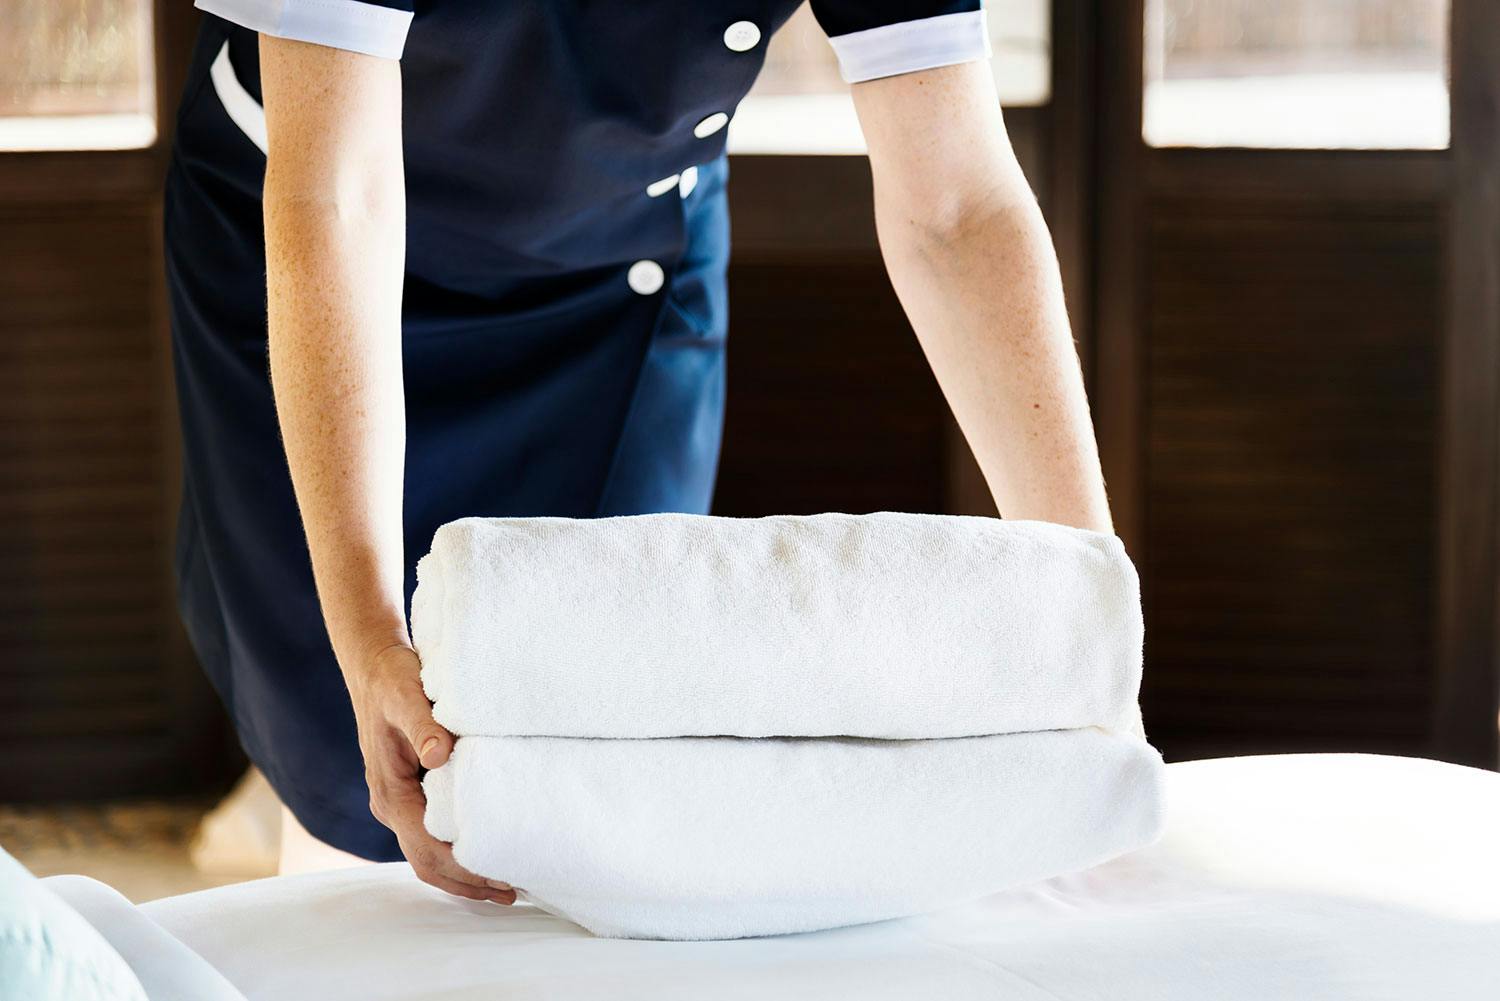 A hotel housekeeping staff member wearing a dark blue uniform places two folded white towels onto a white bedspread.